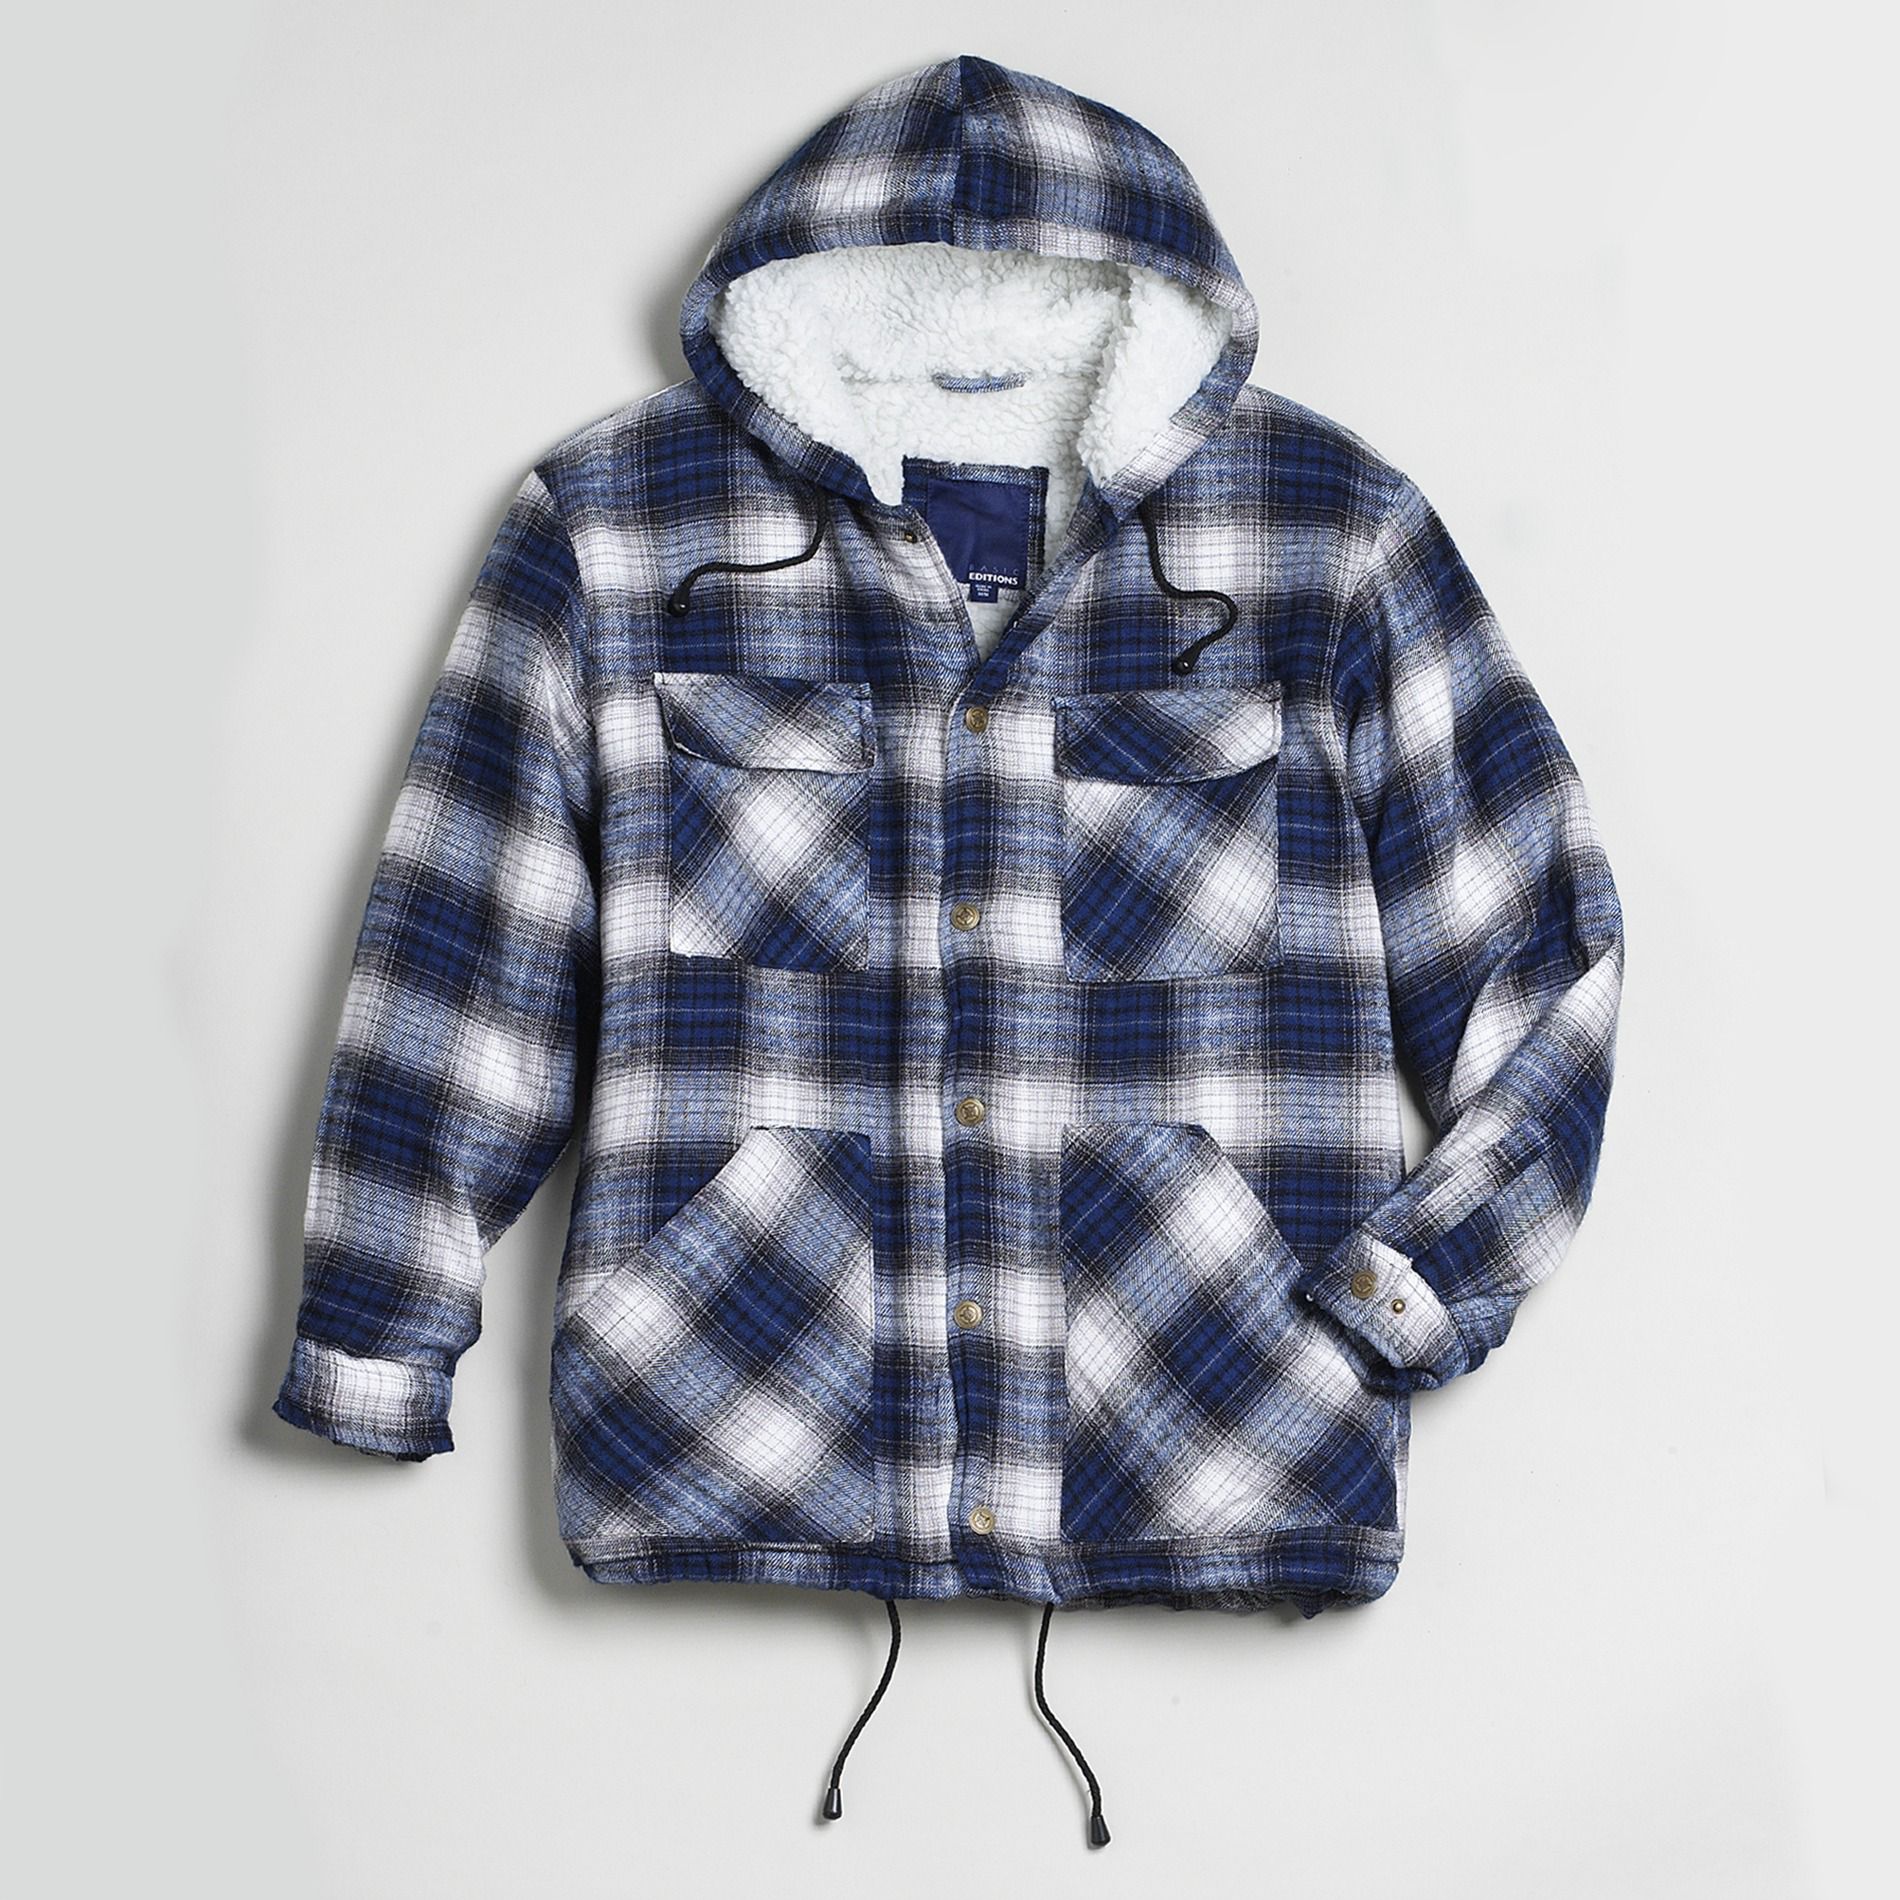 Basic Editions Men's Hooded Sherpa Flannel Jacket